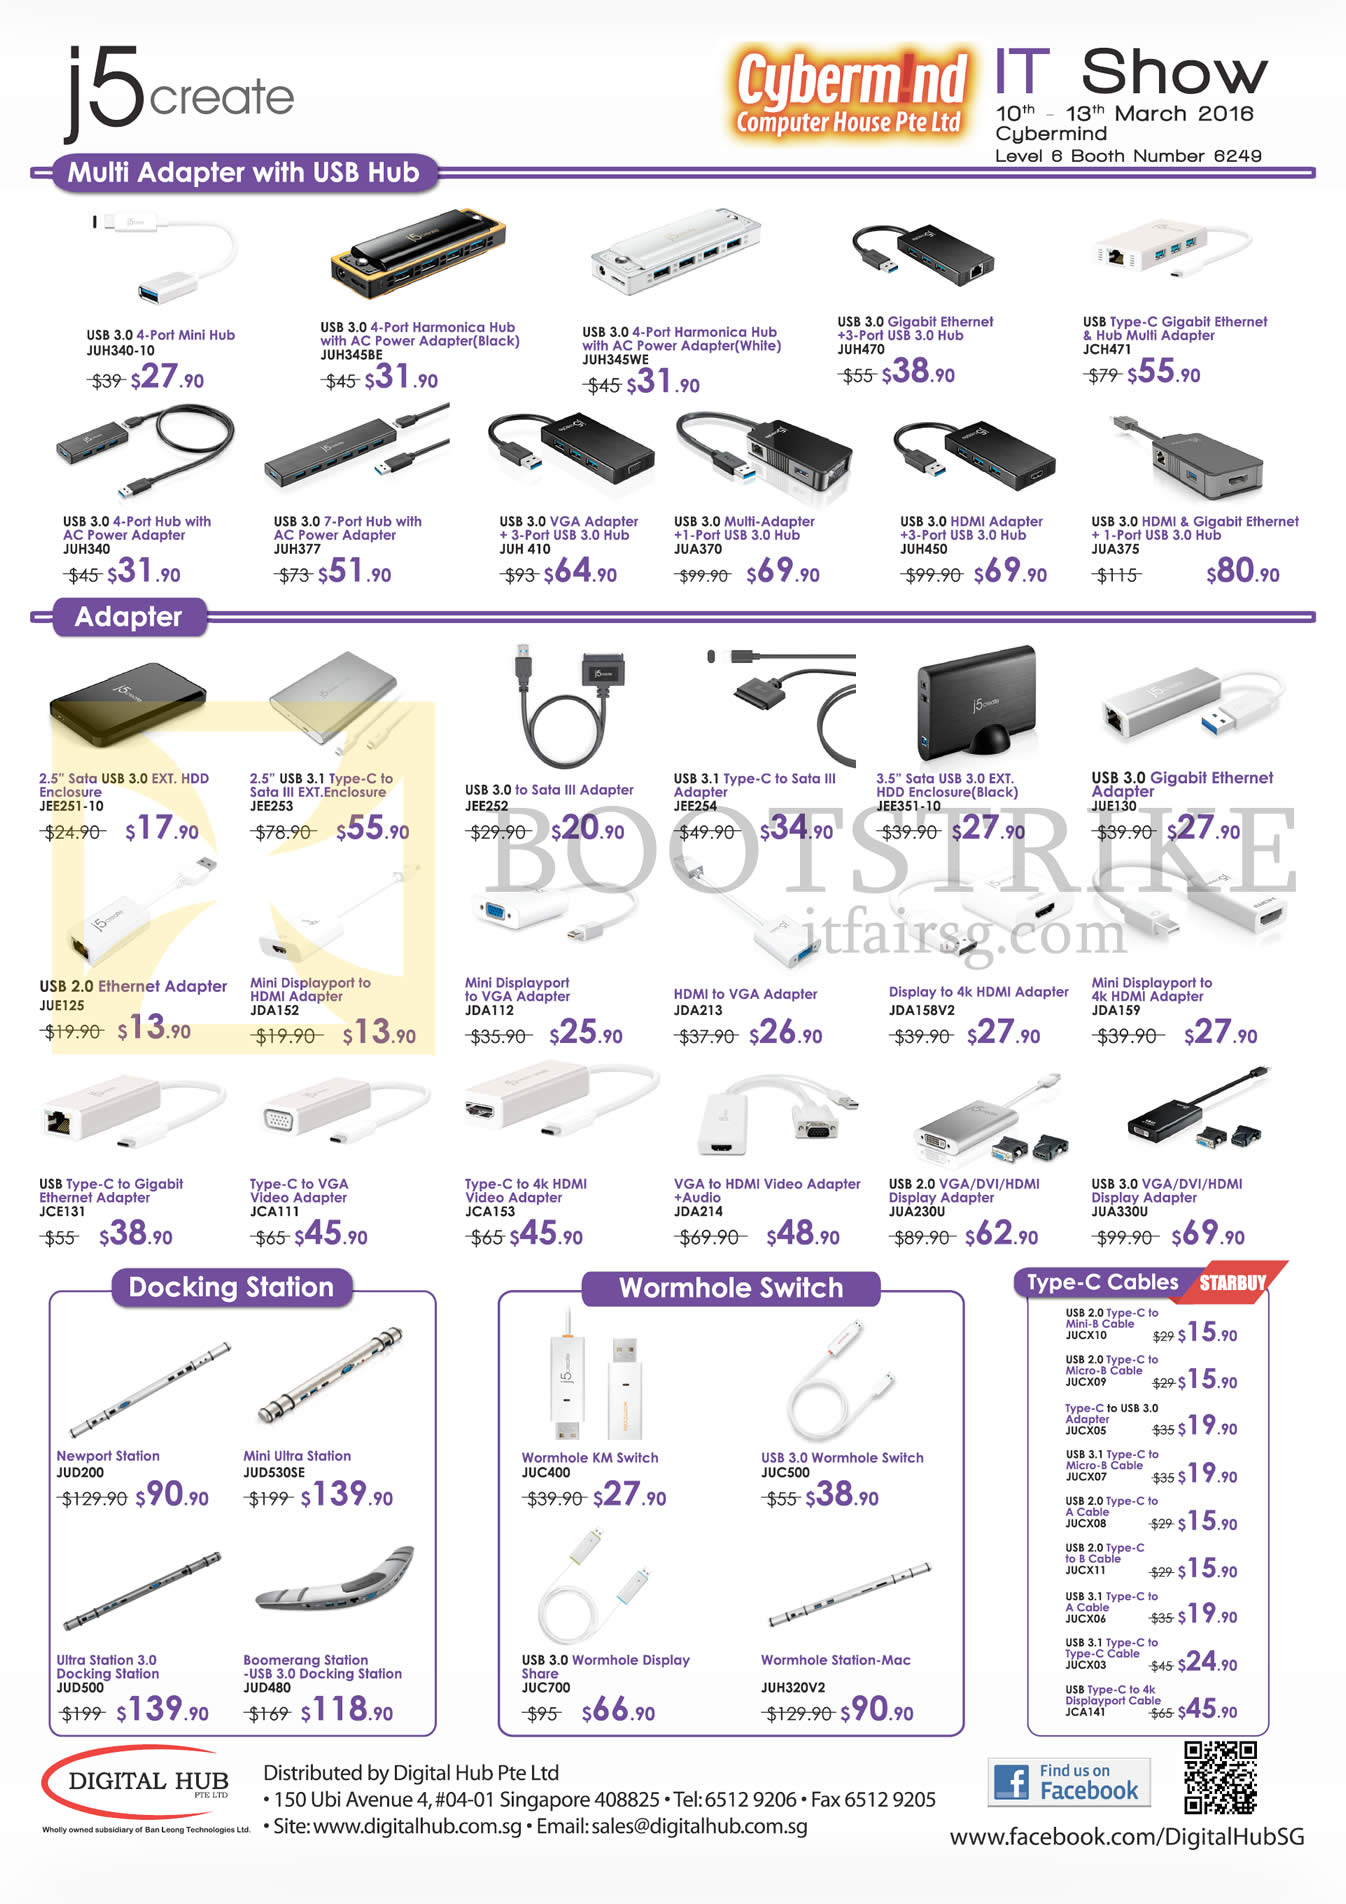 IT SHOW 2016 price list image brochure of Cybermind J5 Create Accessories Multi Adapter, Adapters, Docking Stations, Wormhole Switches, Type C Cables